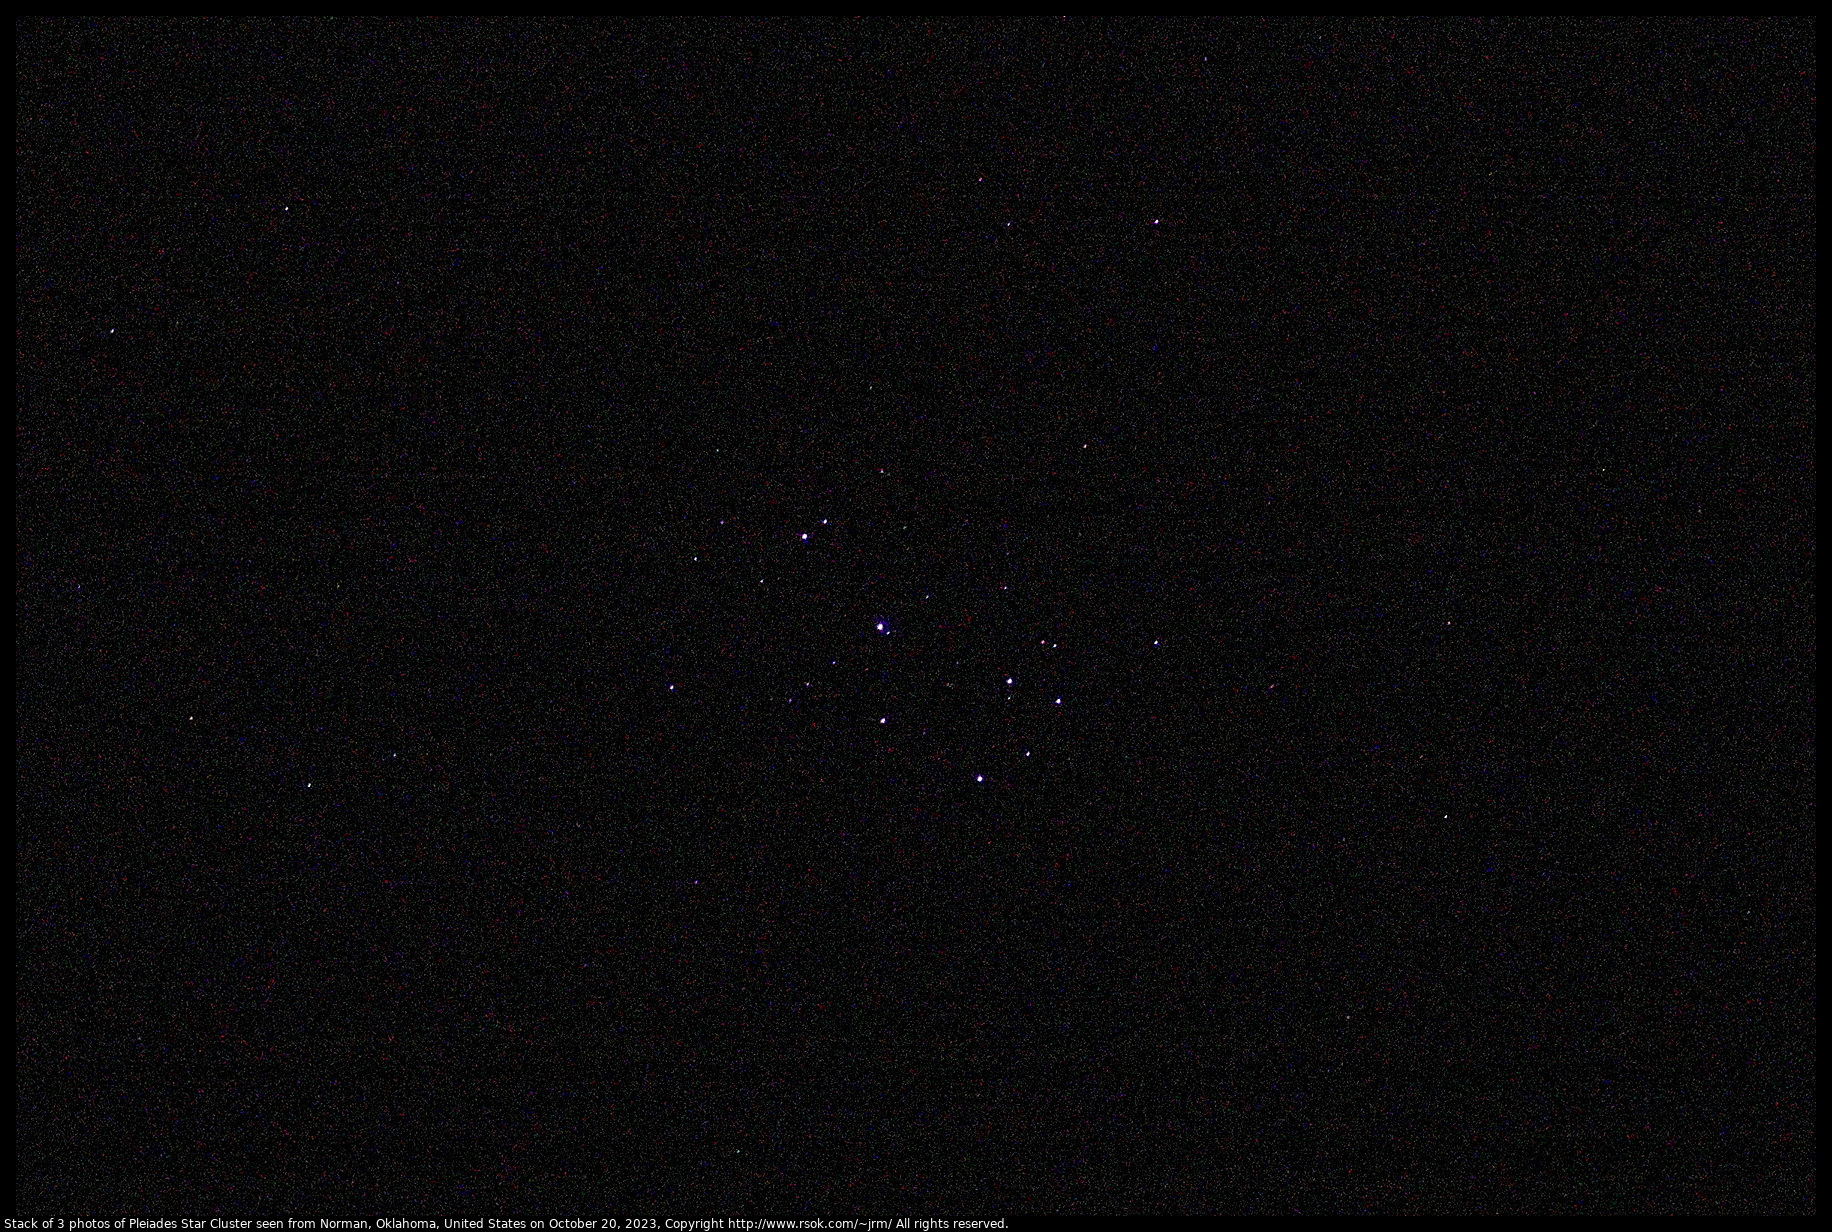 Stack of 3 photos of Pleiades Star Cluster on October 20, 2023